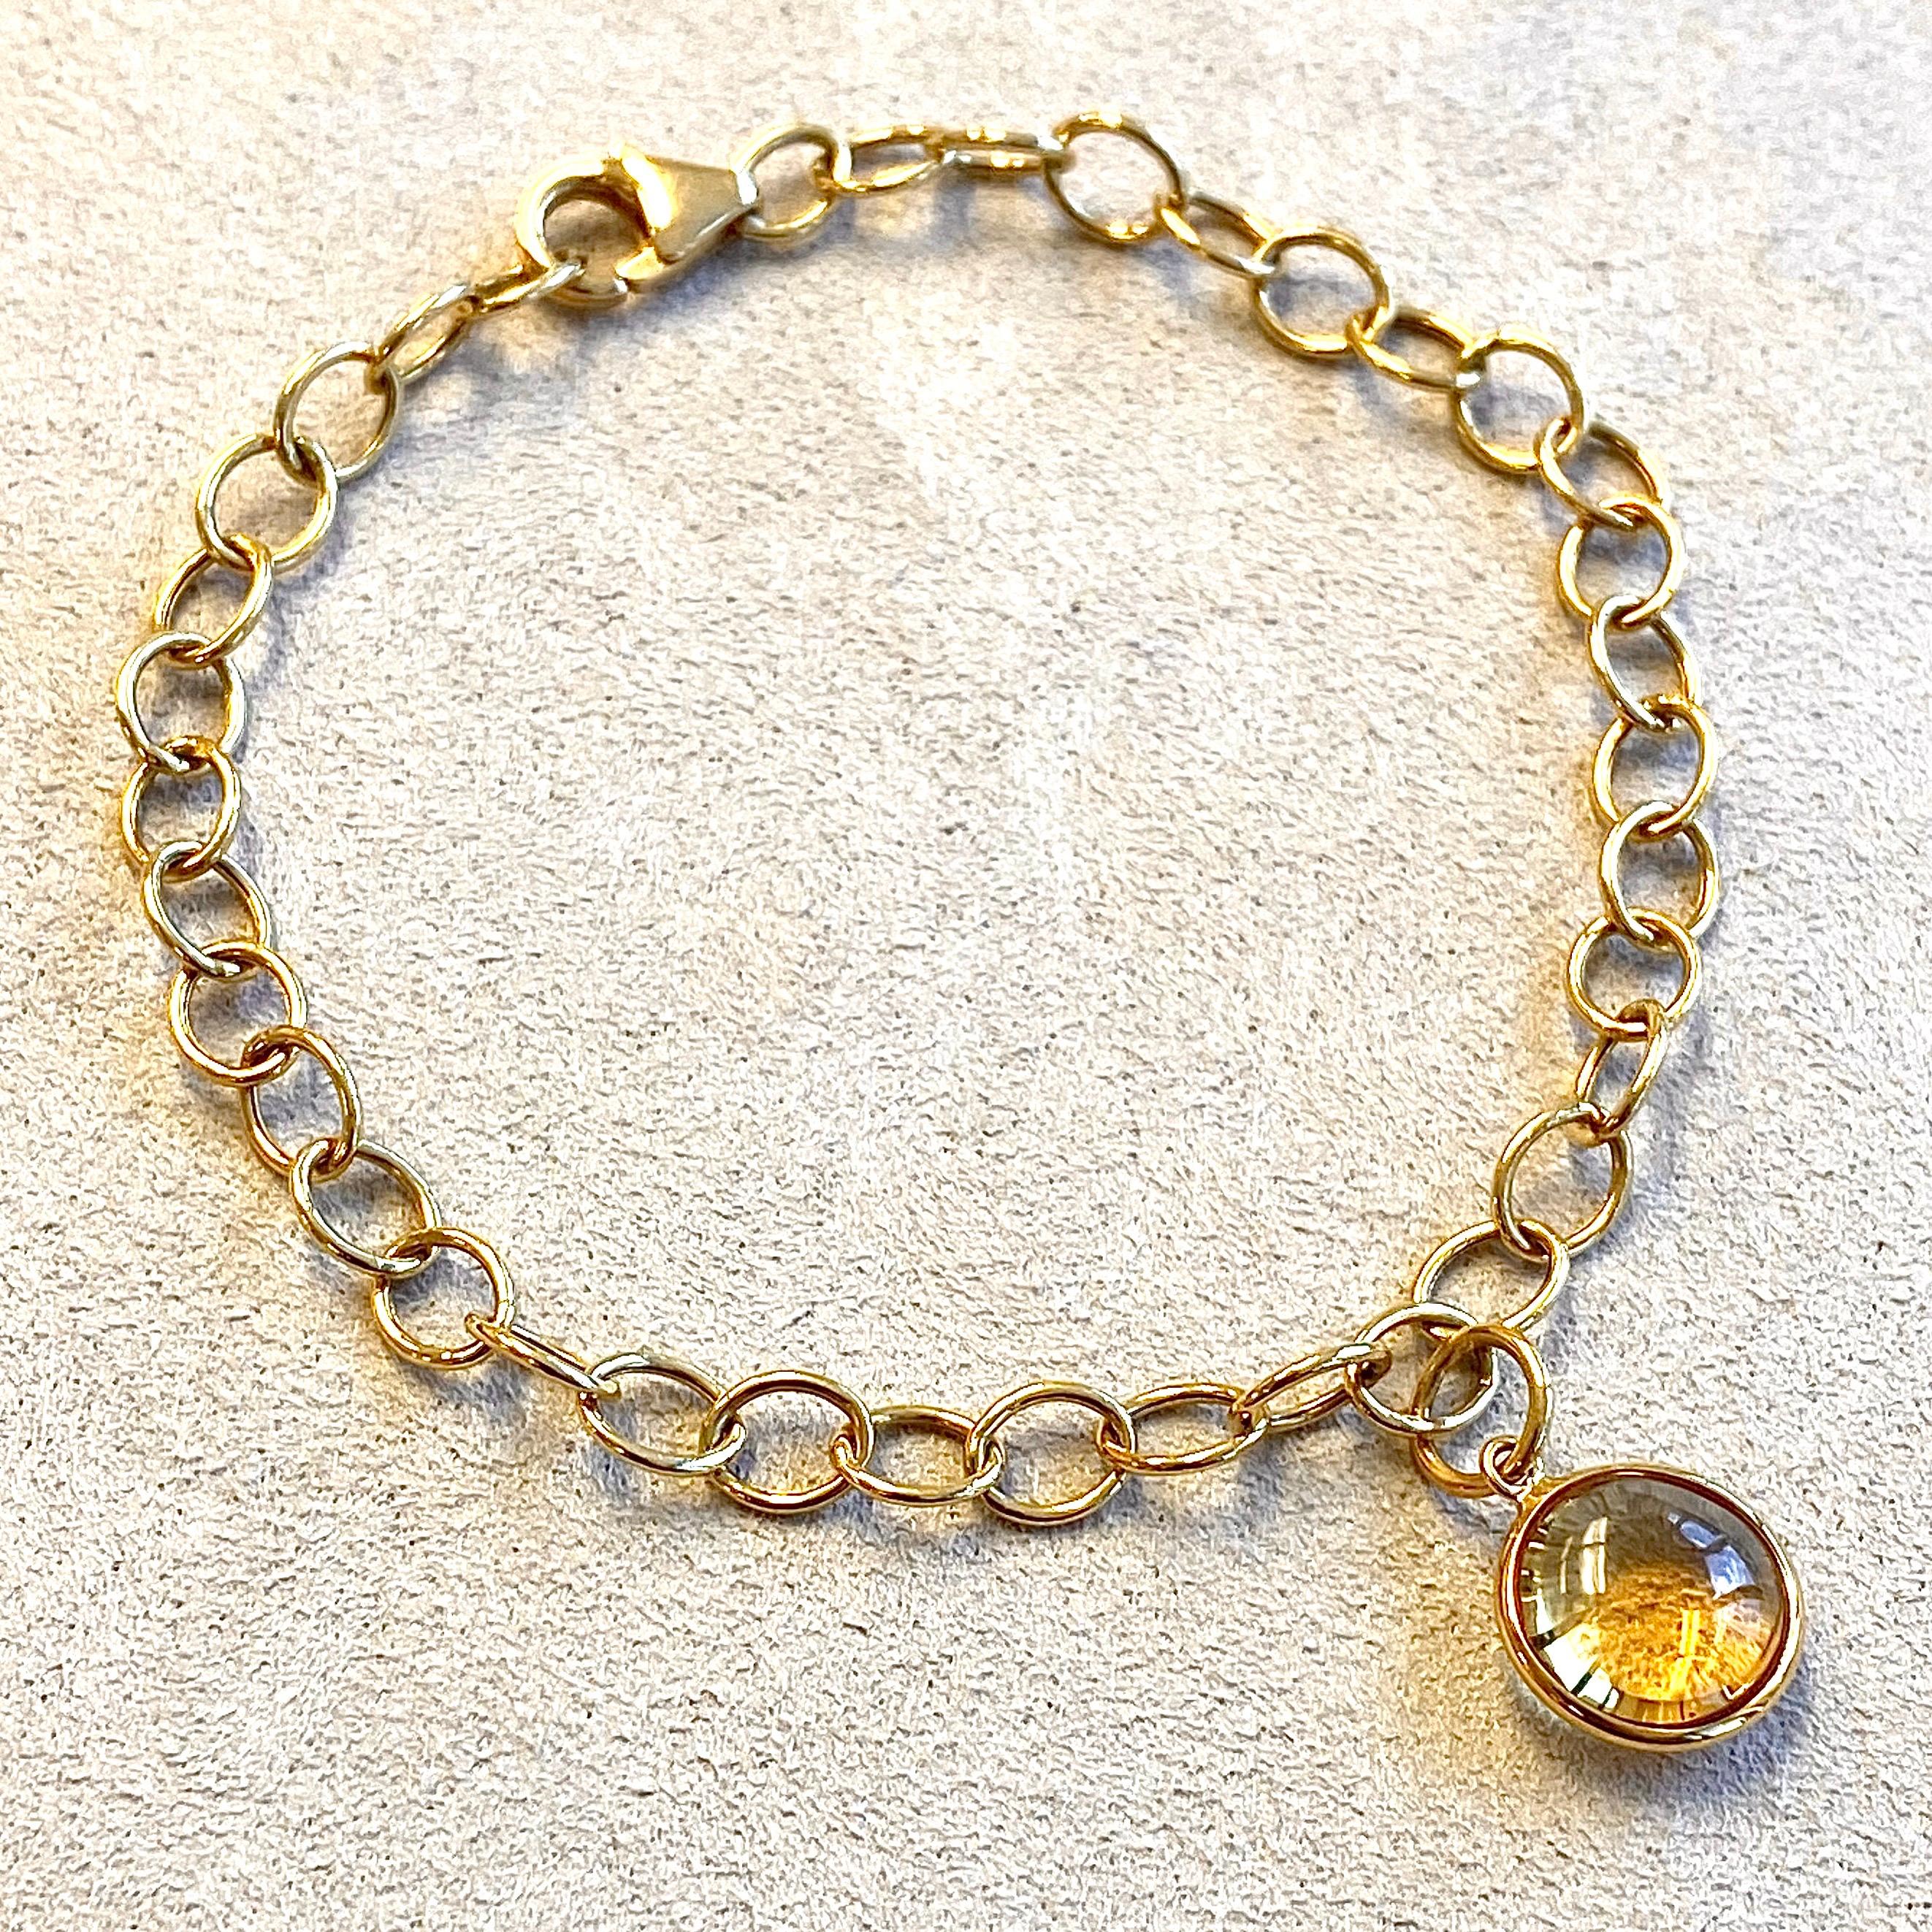 Created in 18 karat yellow gold
Citrine 3.5 cts approx 
7.25 inch length with lobster clasp

Crafted from 18 karat yellow gold, this bracelet features a captivating citrine gemstone of approximately 3.5 carats and measures 7.25 inches in length,